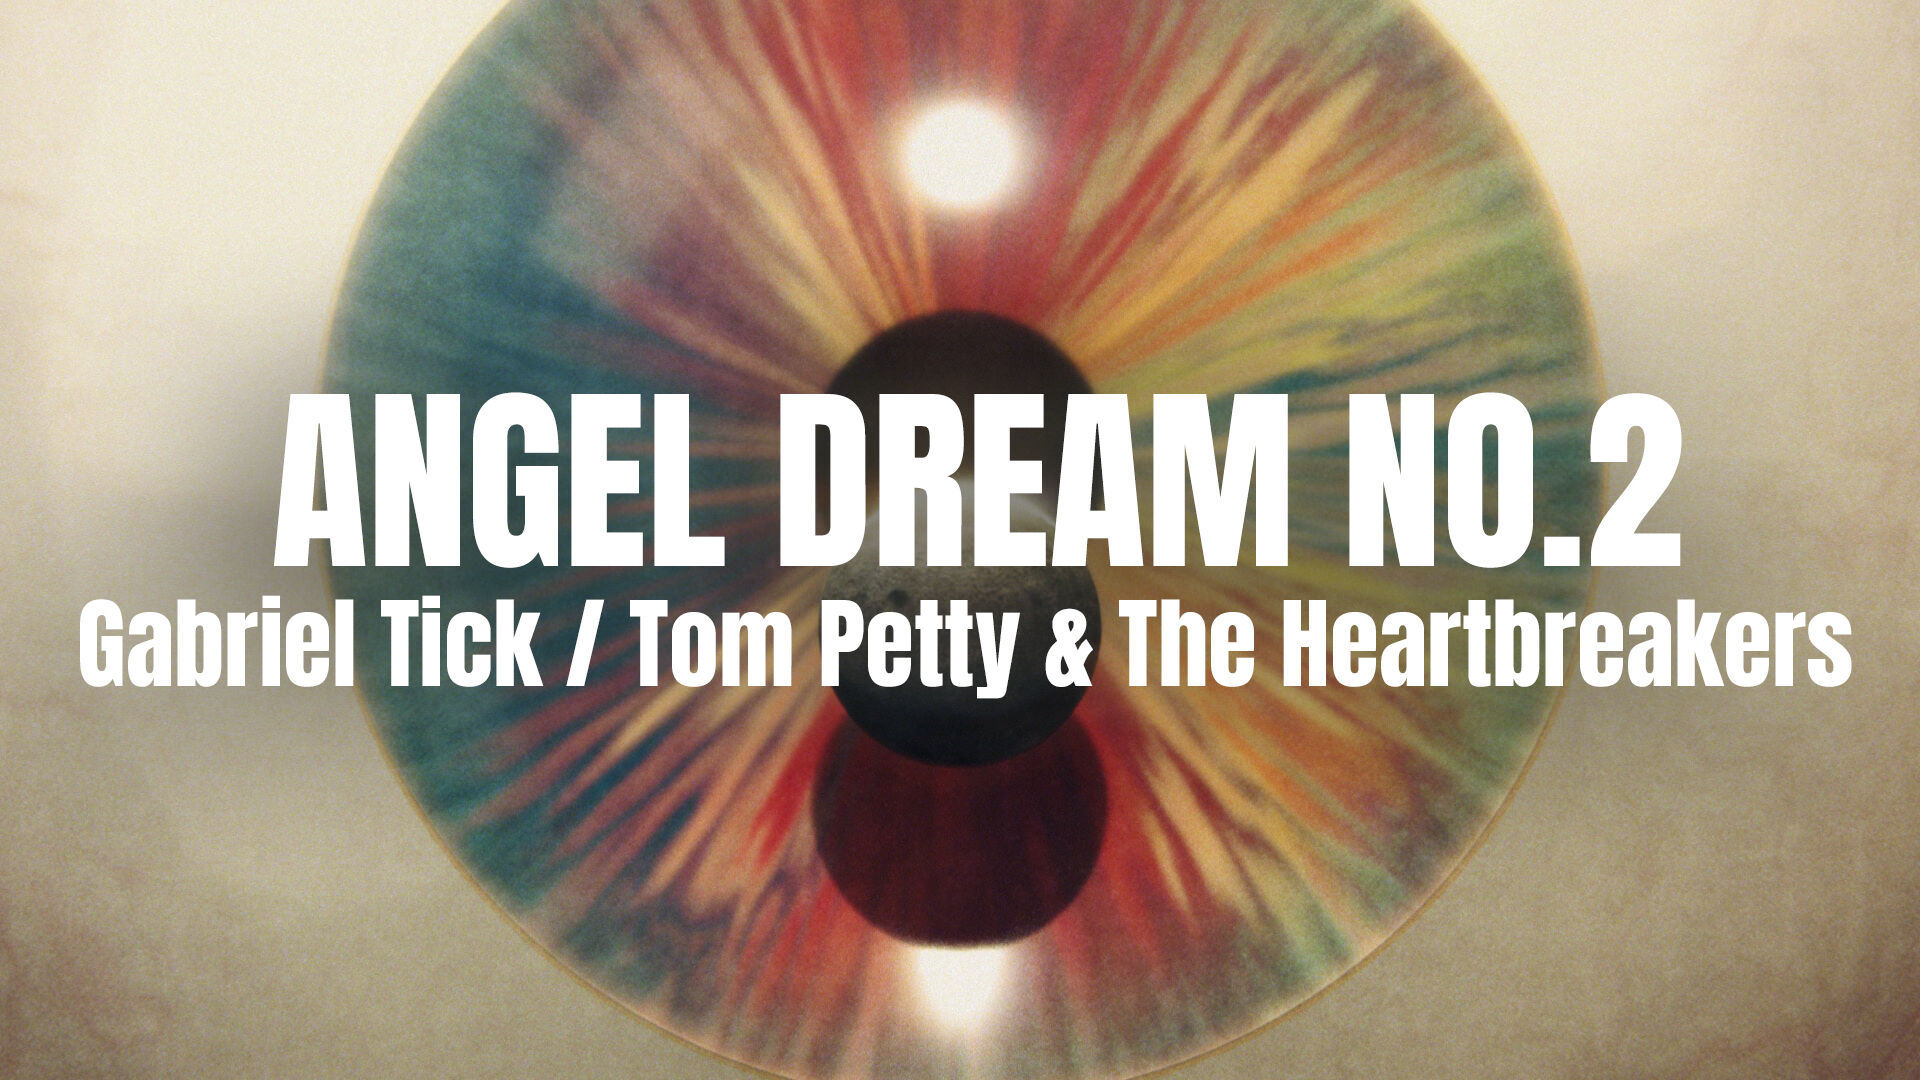 Must see: music video | Angel dream no.2